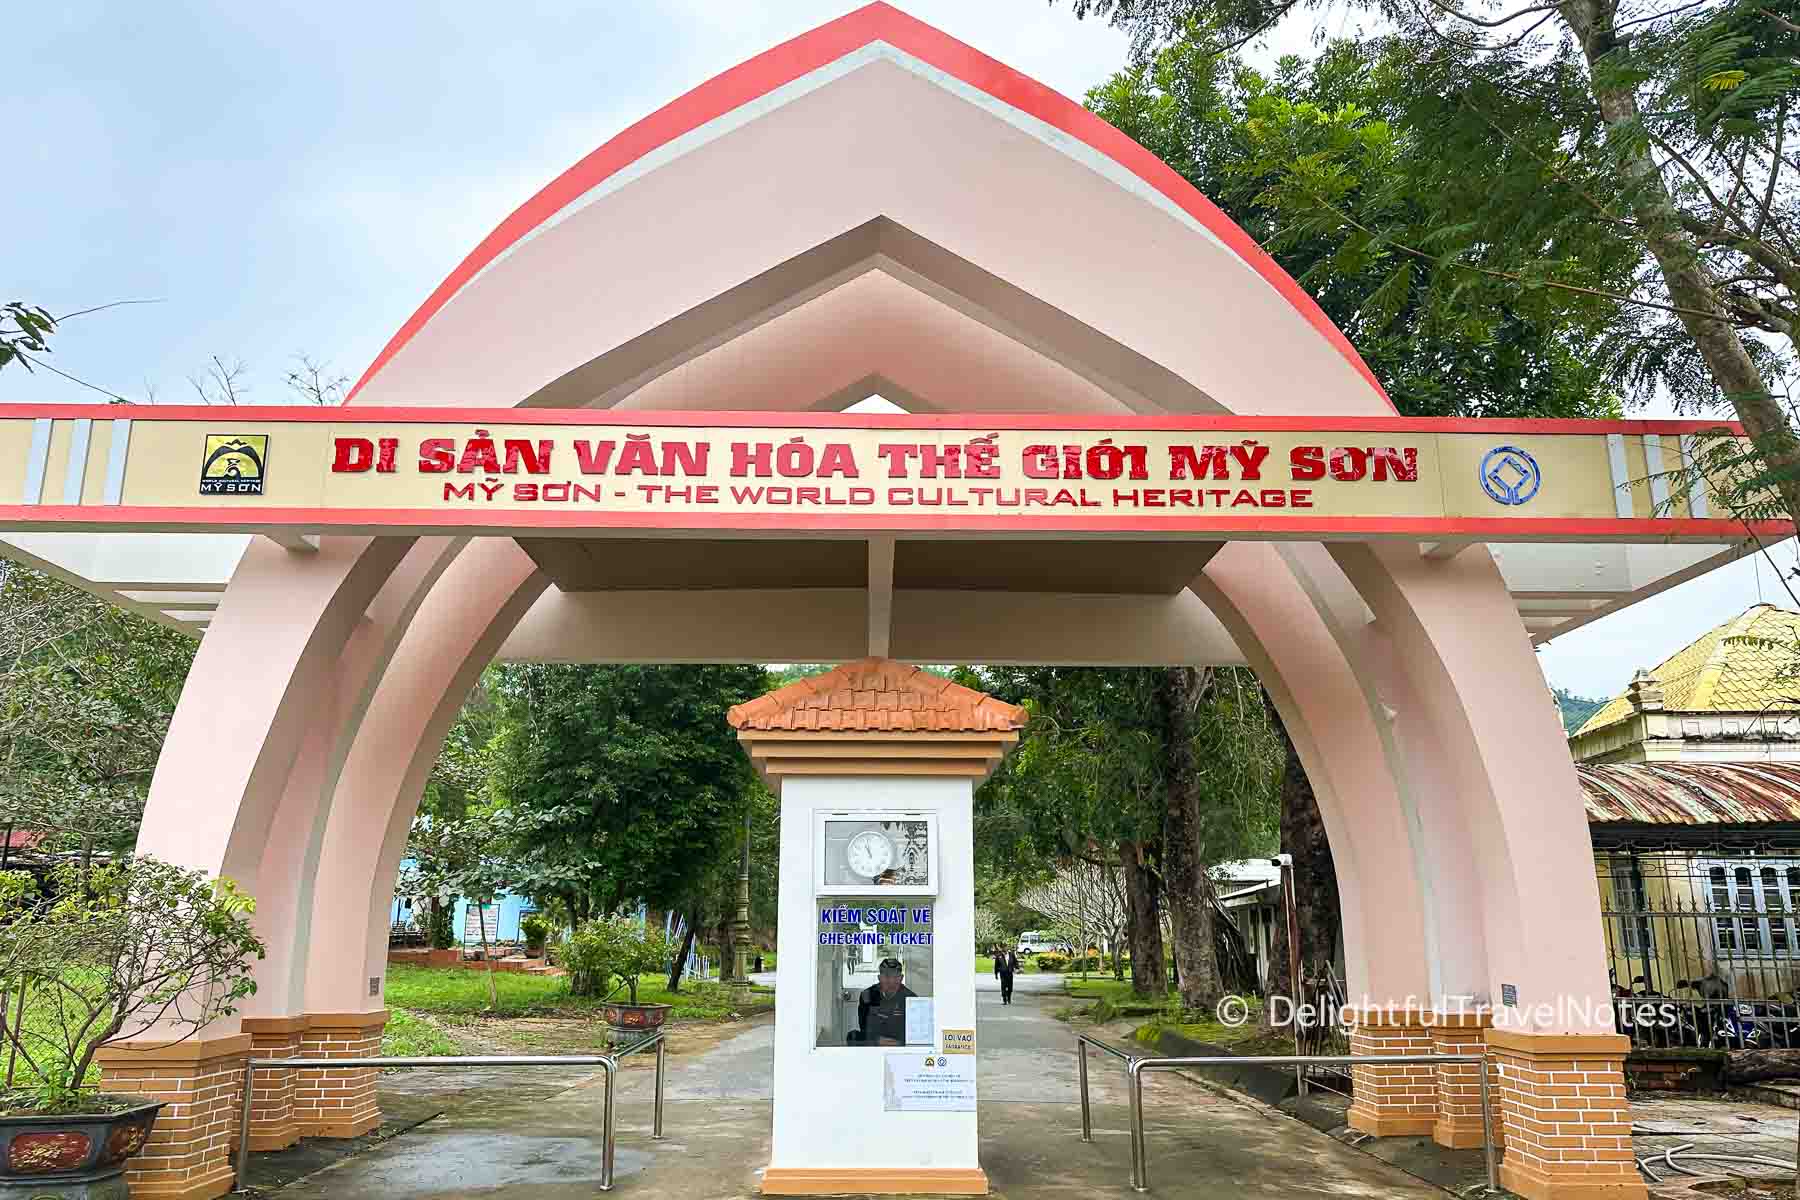 Entrance of My Son Sanctuary in Quang Nam Vietnam.